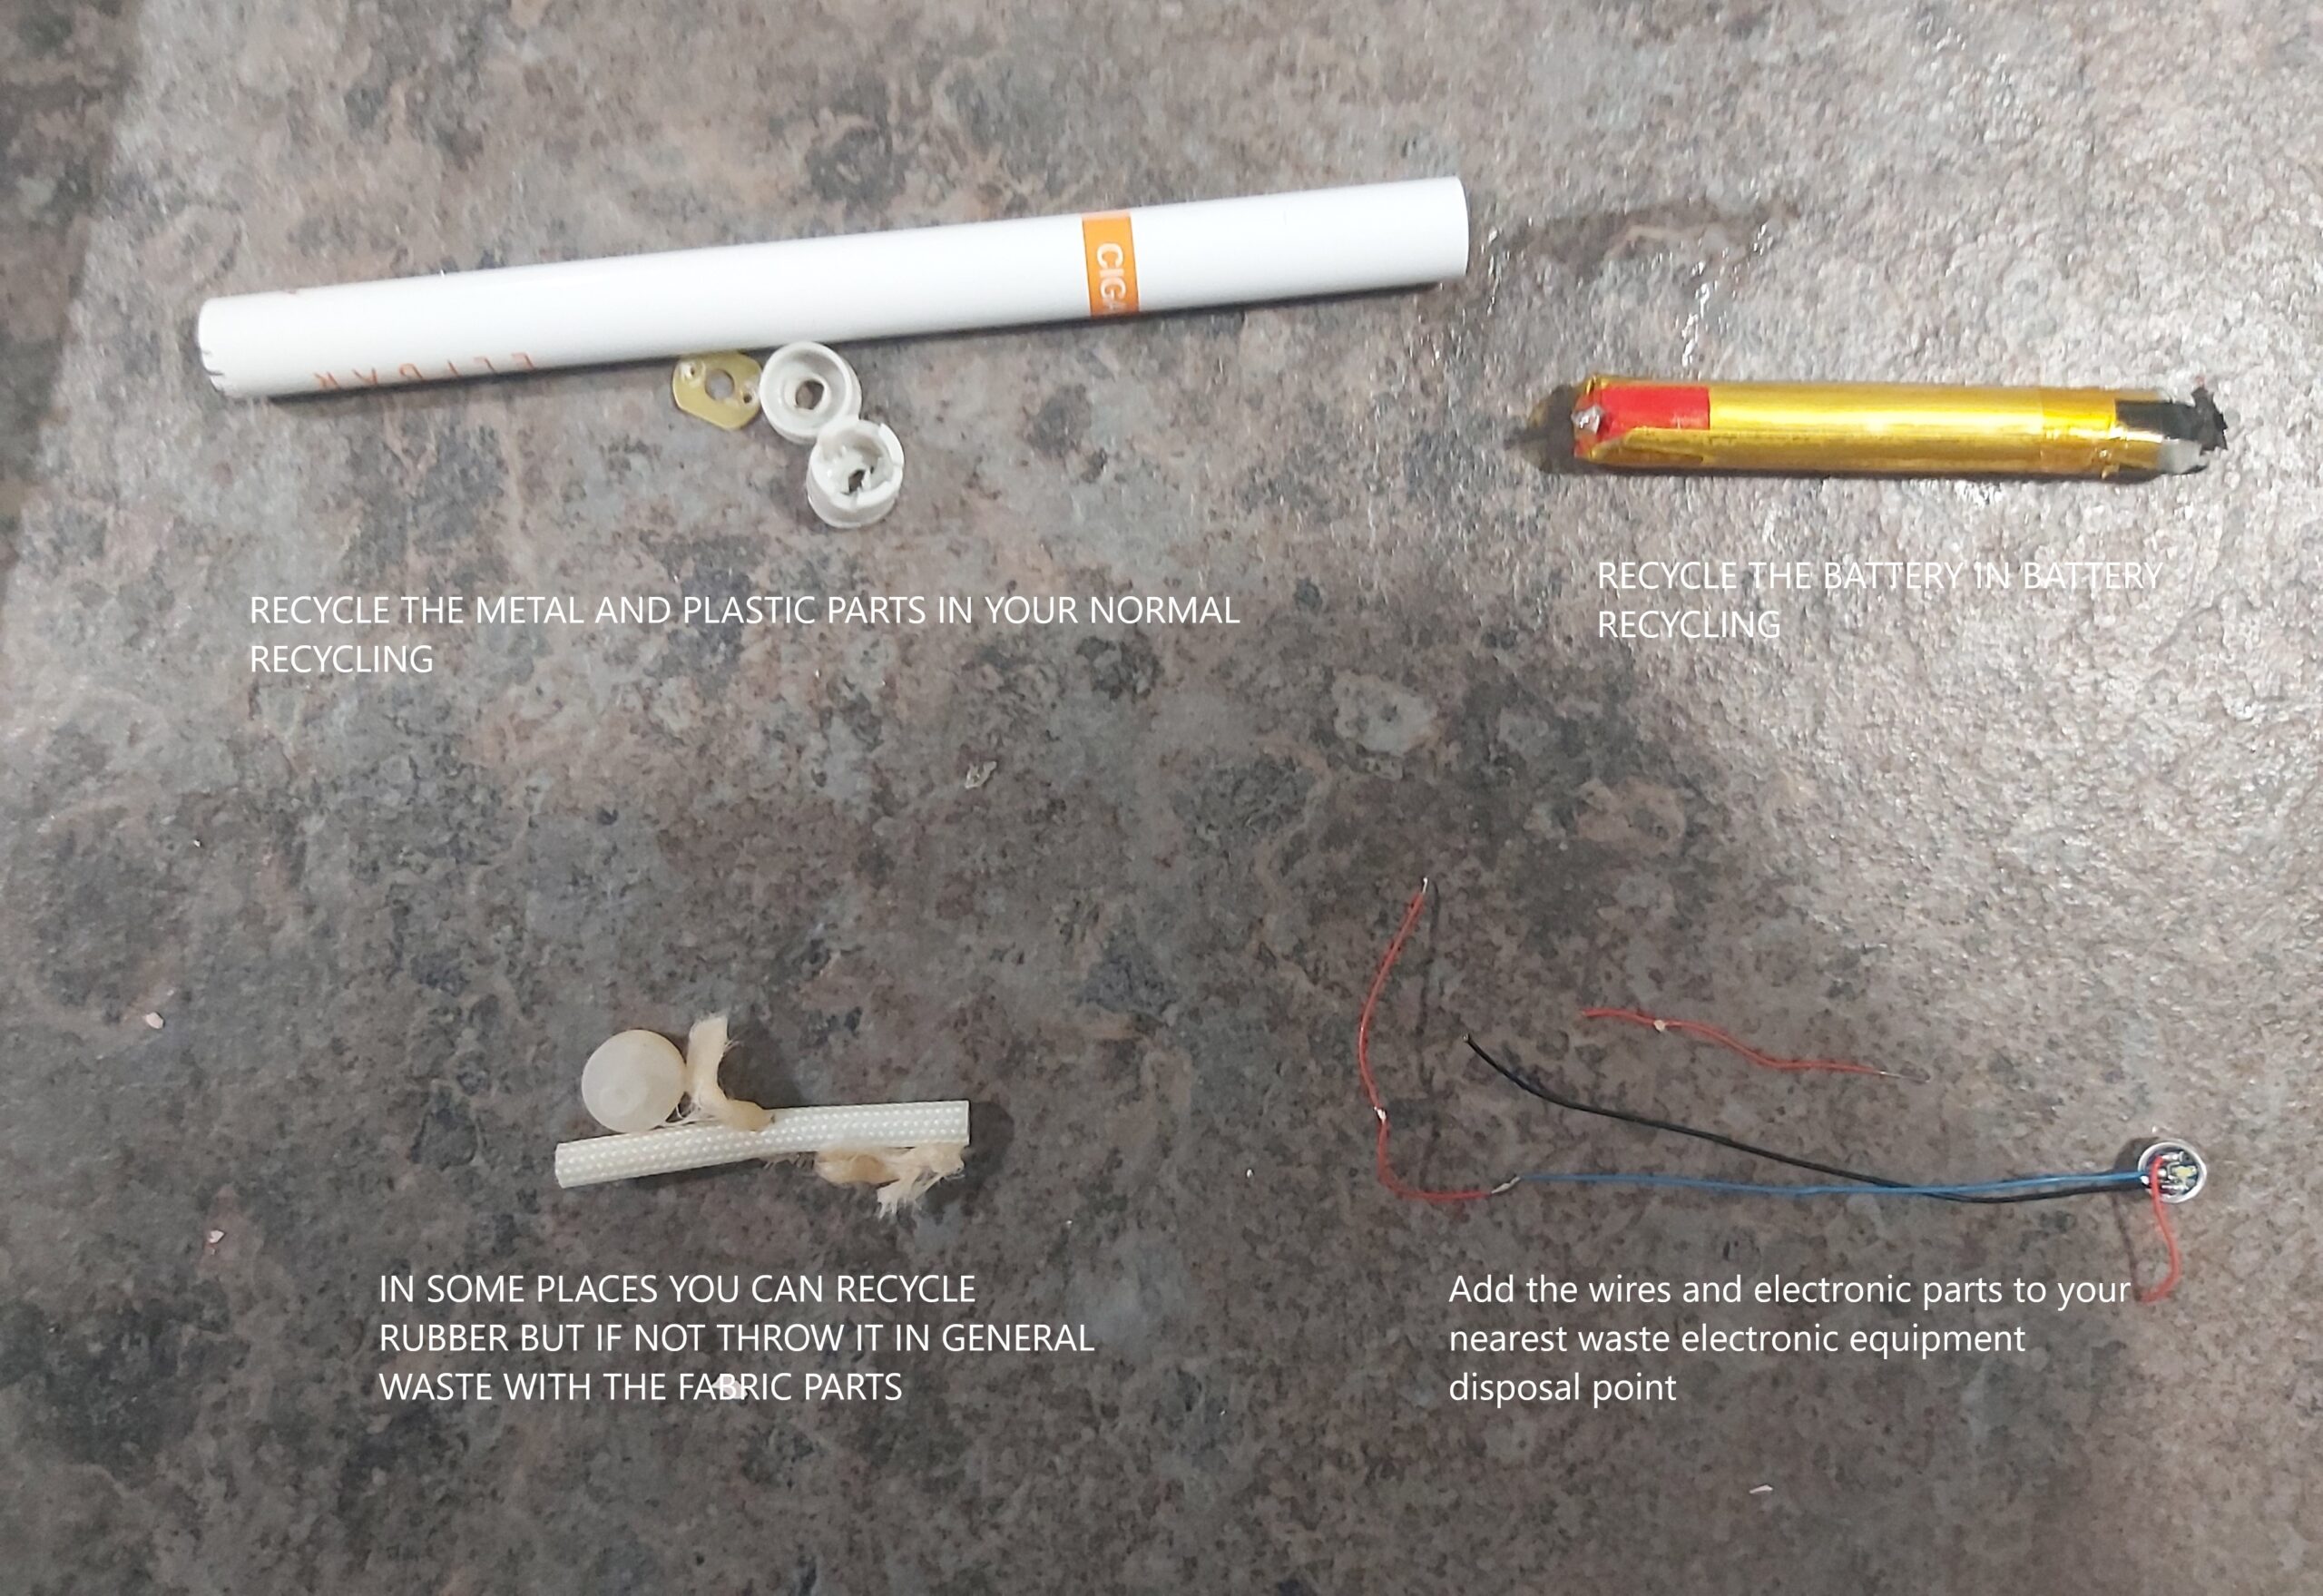 Disassembling Elfbar Cigalike Disposable Electronic Vape or Cigarette Recycle as Much of the Parts as you can